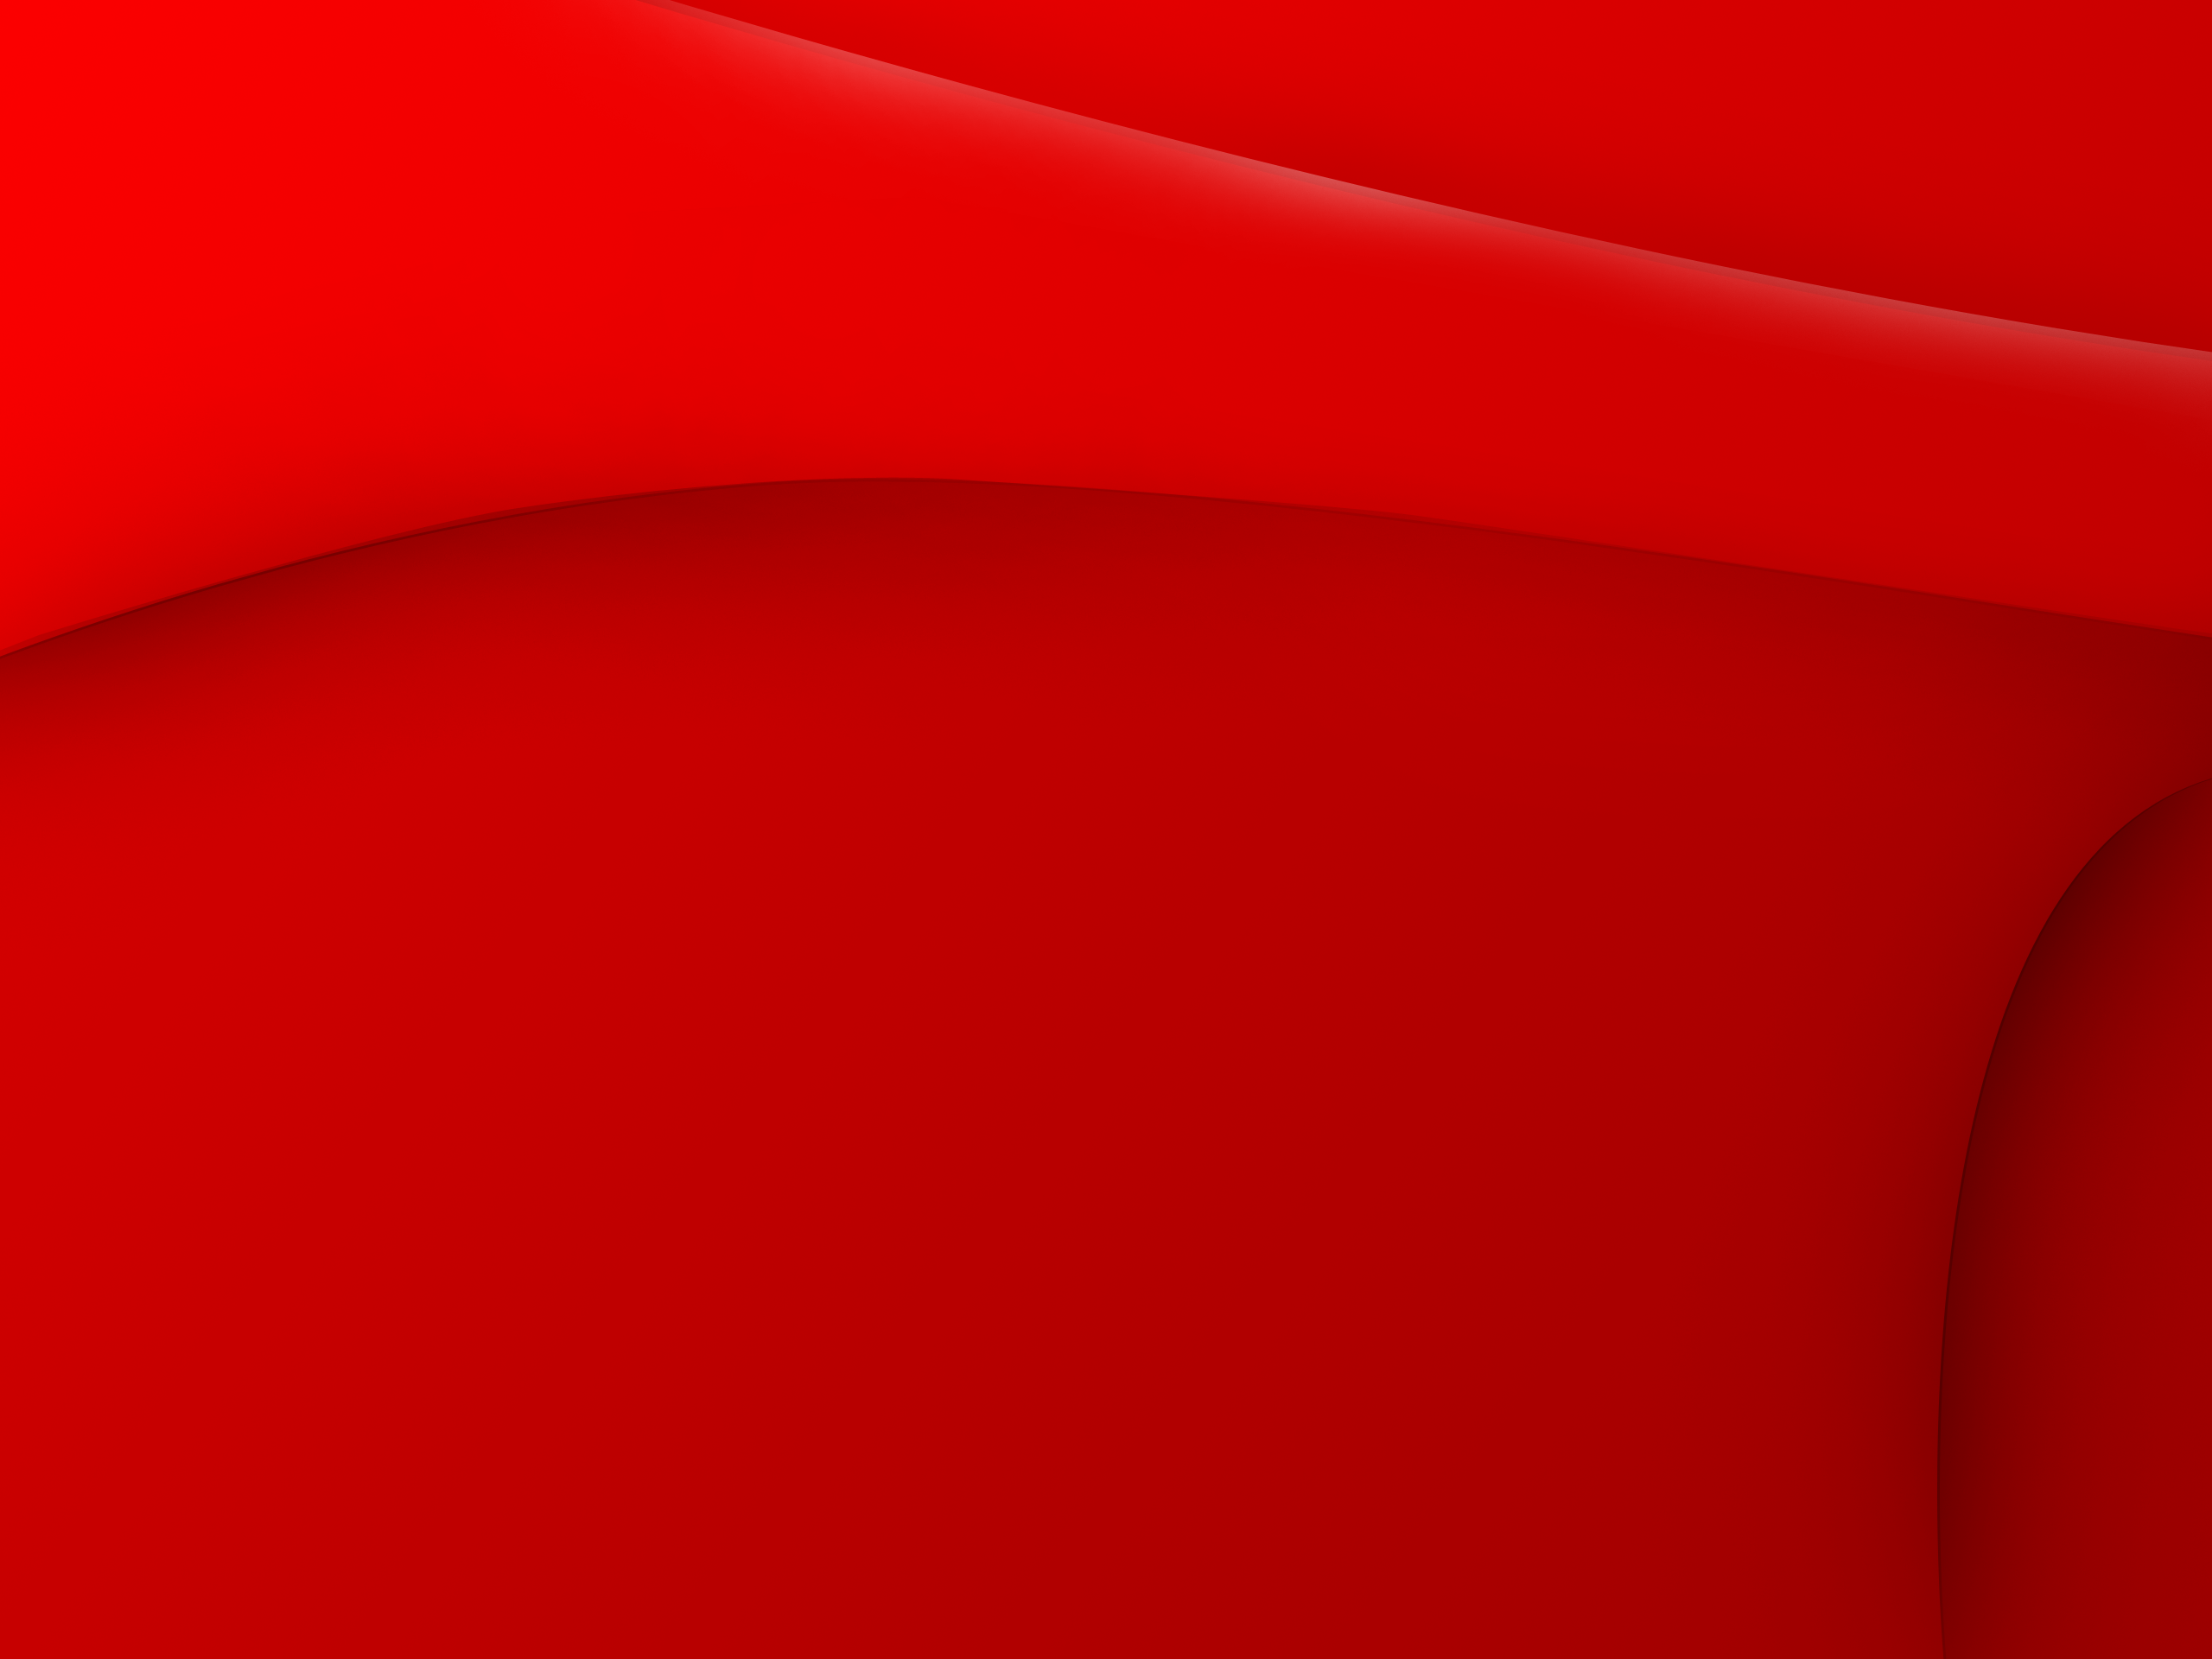 Wallpaper Abstract Red By Too Fast On Deviantart